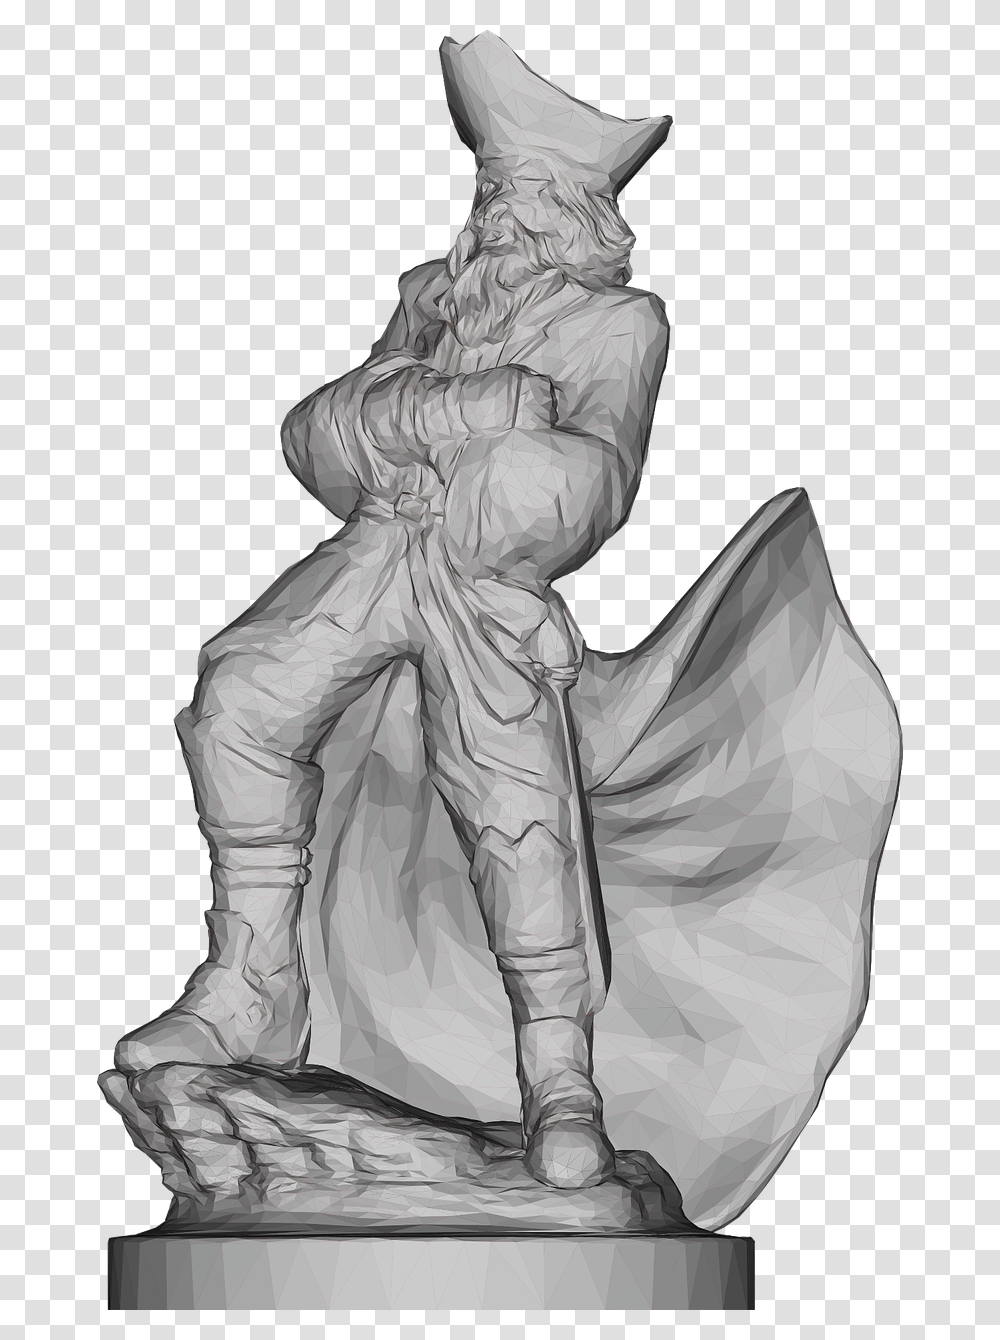 Sculpture Pirate Low Poly 3d Abstract Art Art Sculpture, Person, Human, Statue, Drawing Transparent Png